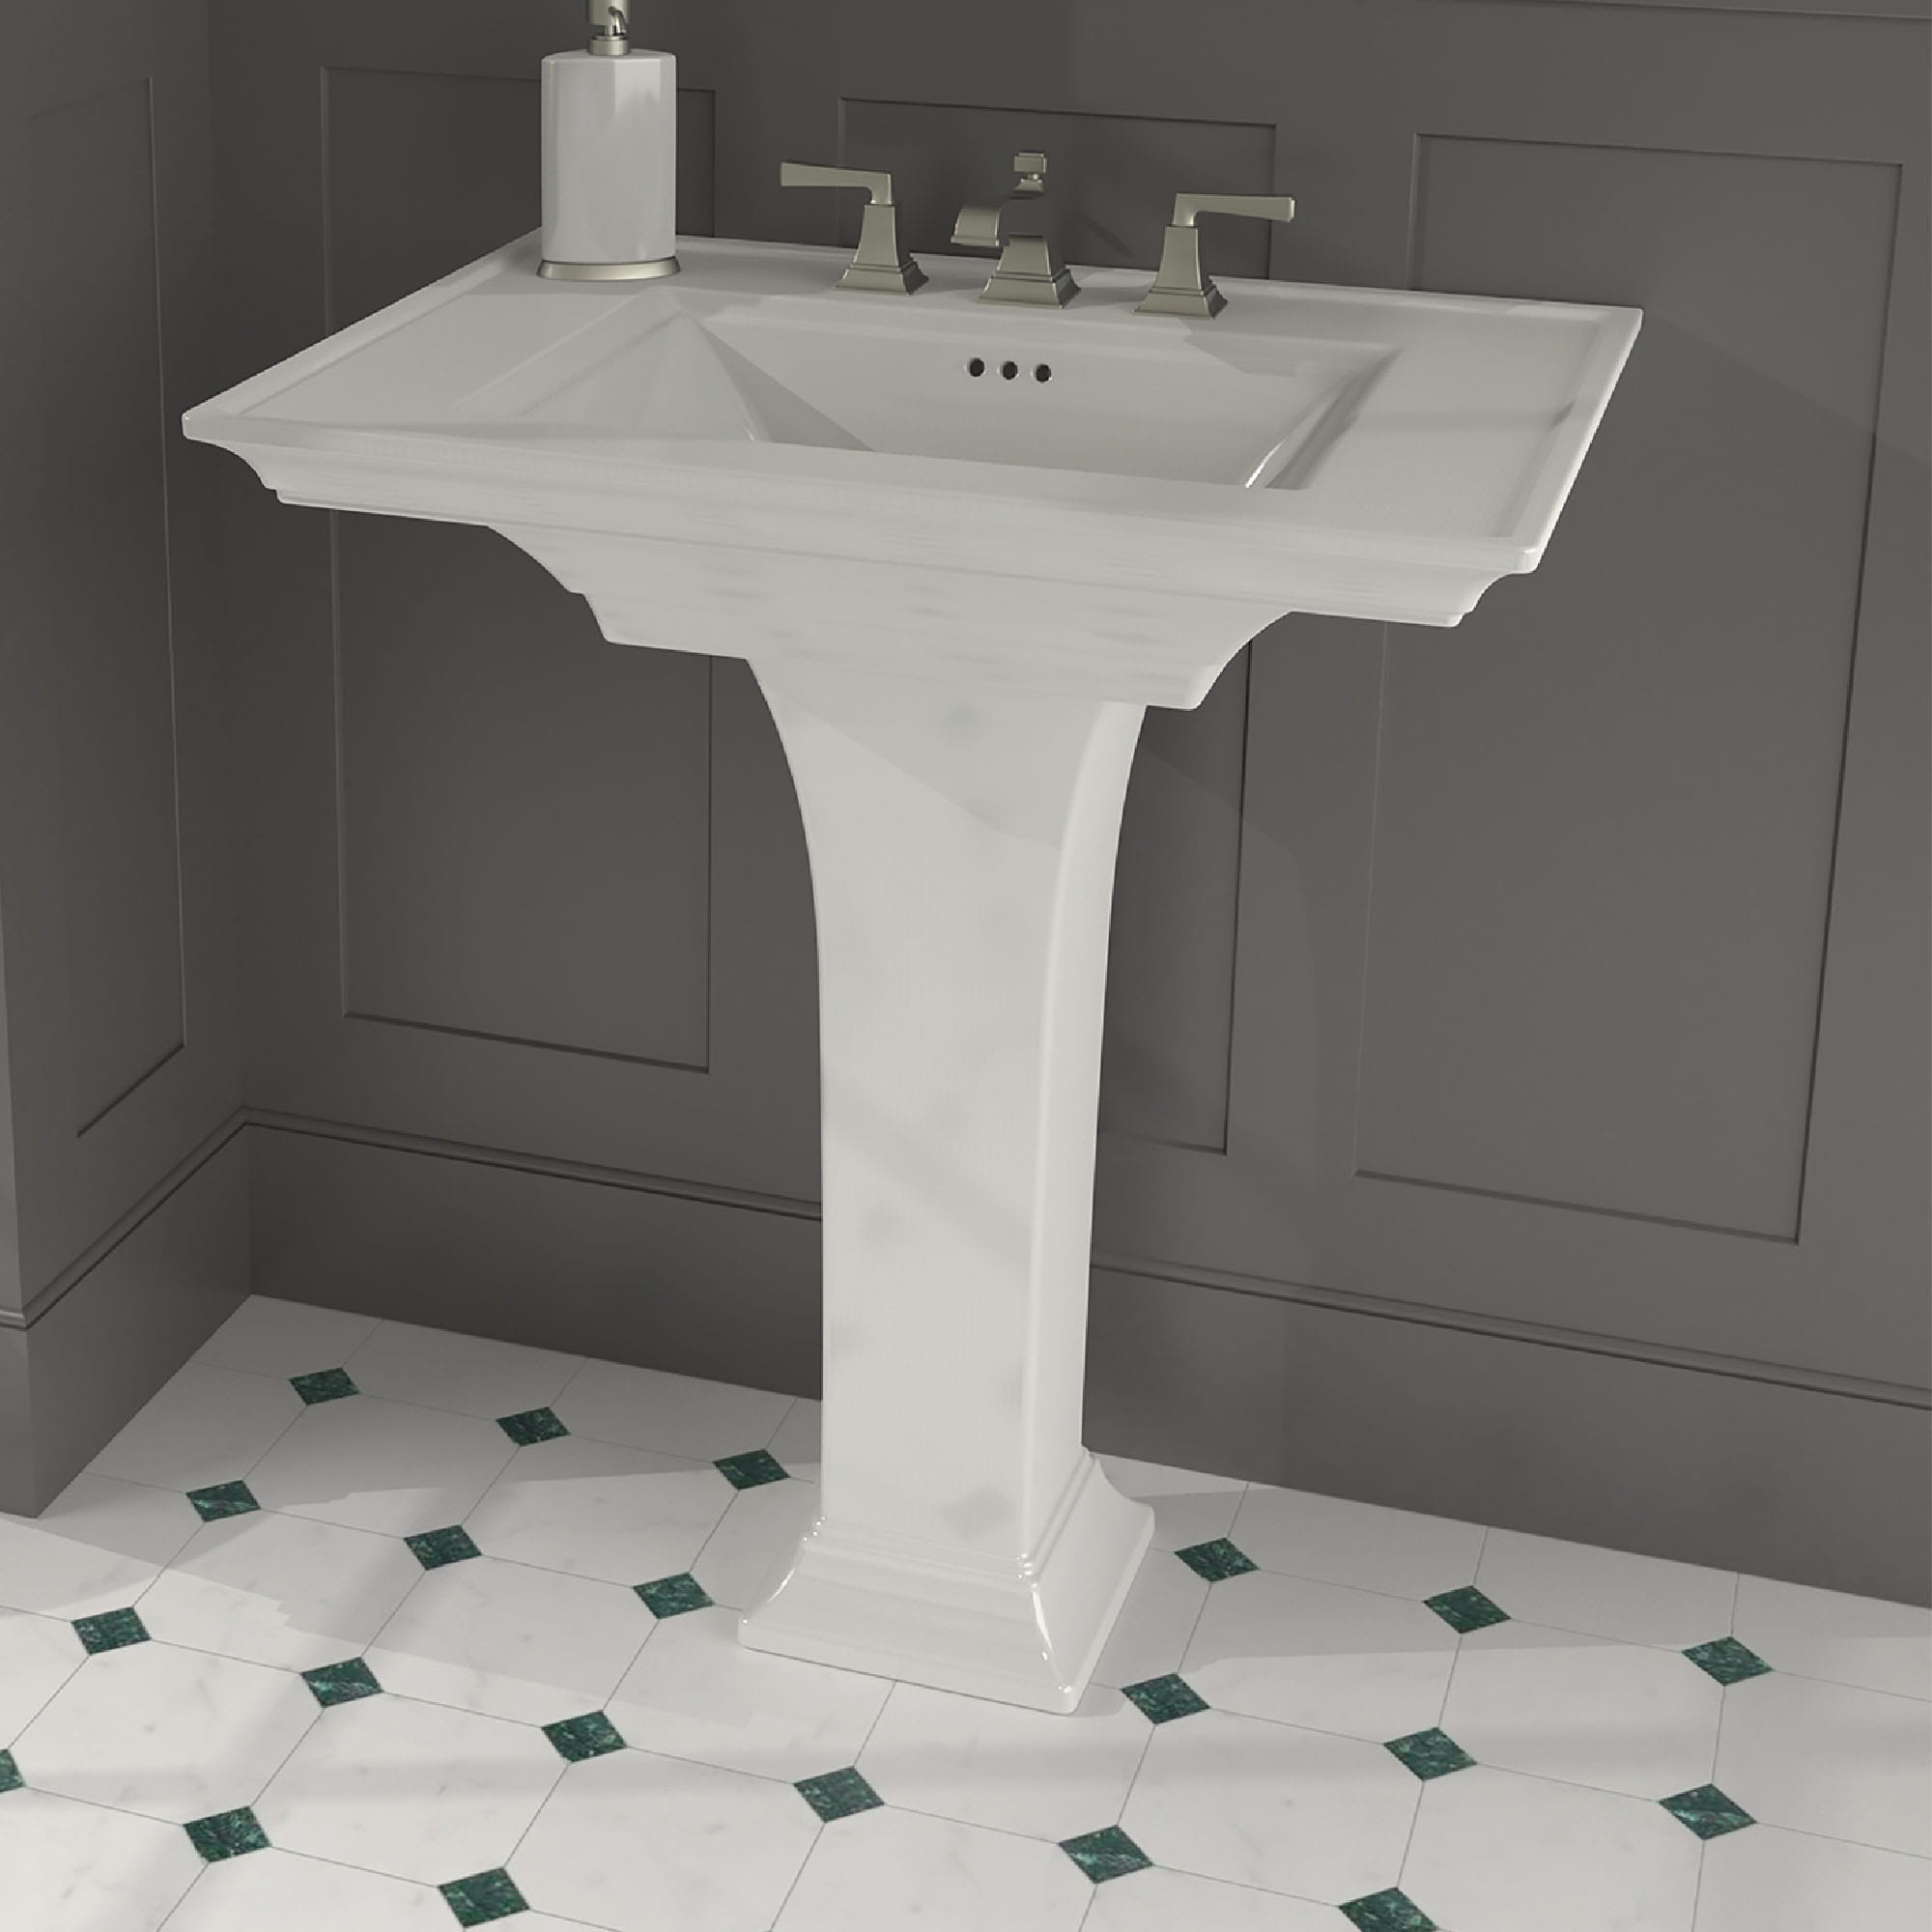 Town Square S 8 Inch Widespread Pedestal Sink Top and Leg Combination WHITE